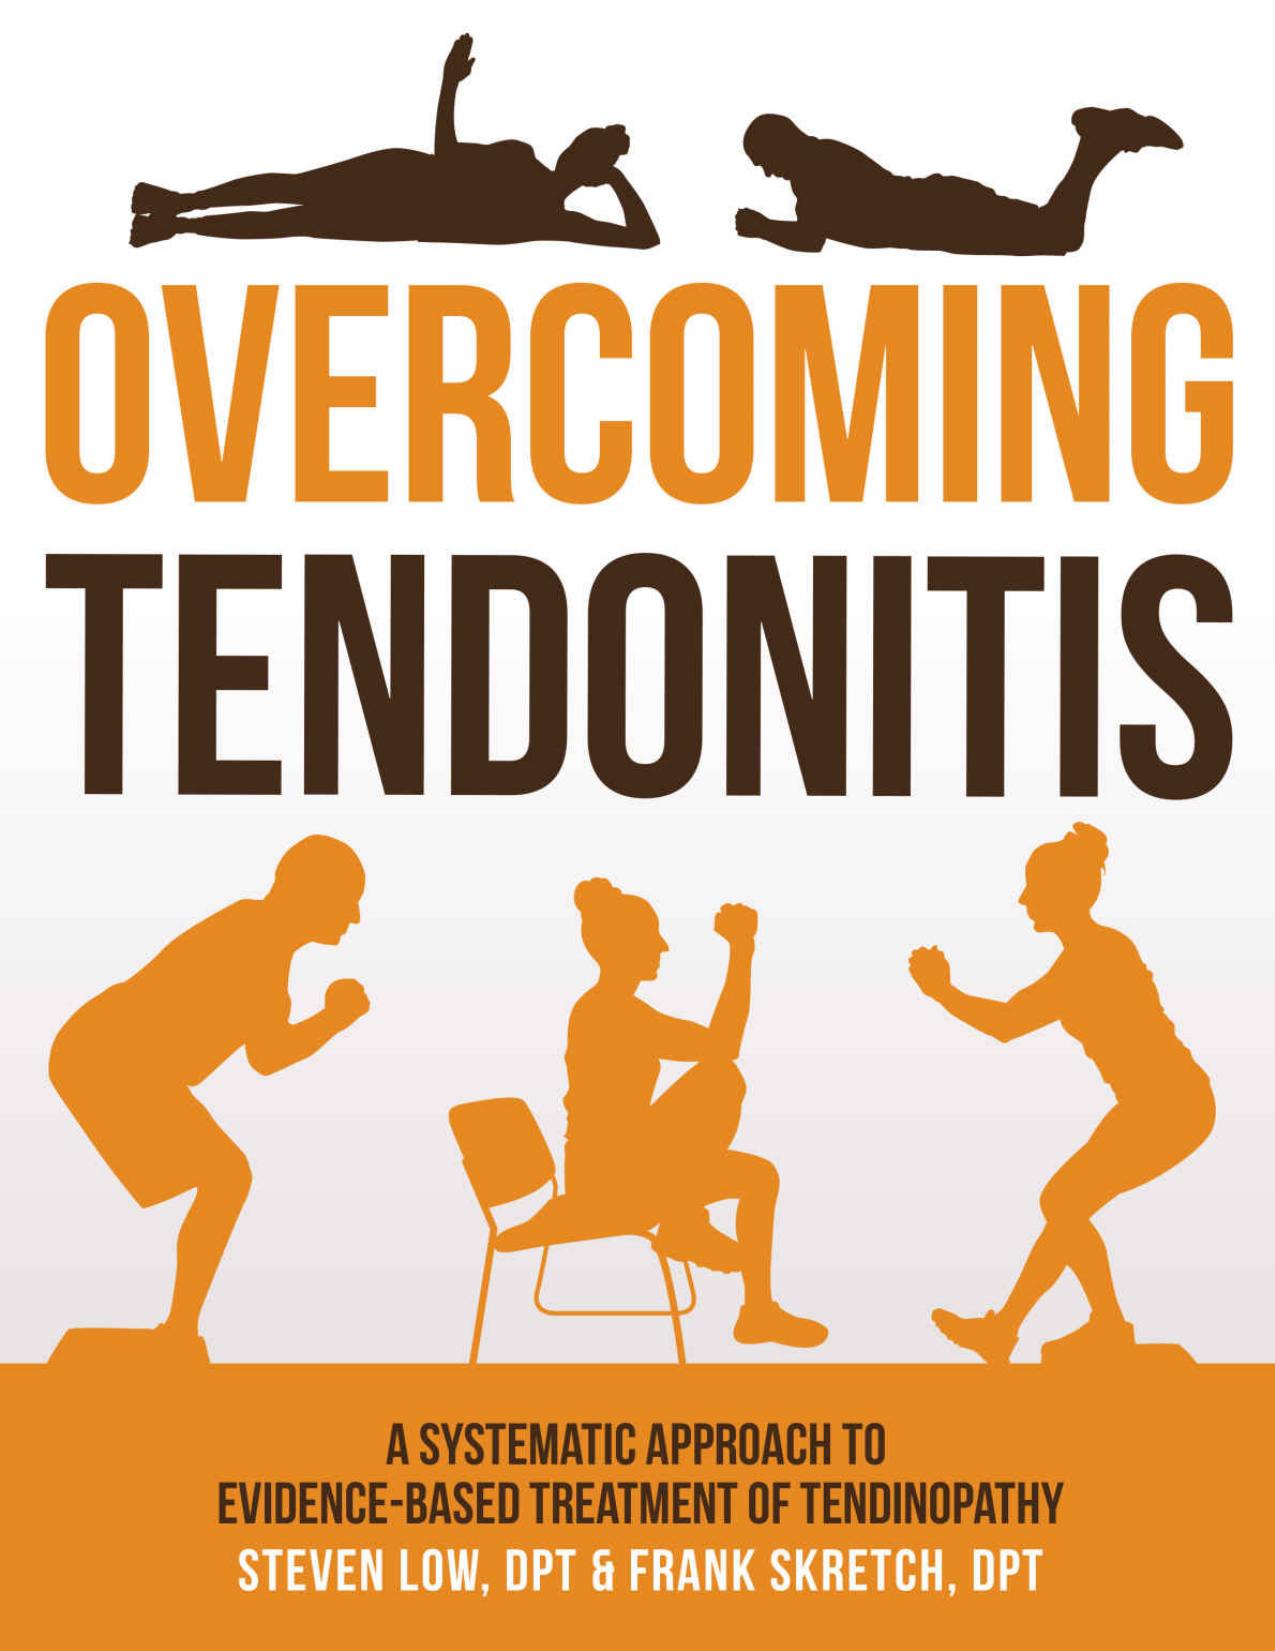 Overcoming Tendonitis: A Systematic Approach to the Evidence-Based Treatment of Tendinopathy by Steven Low & Frank Skretch